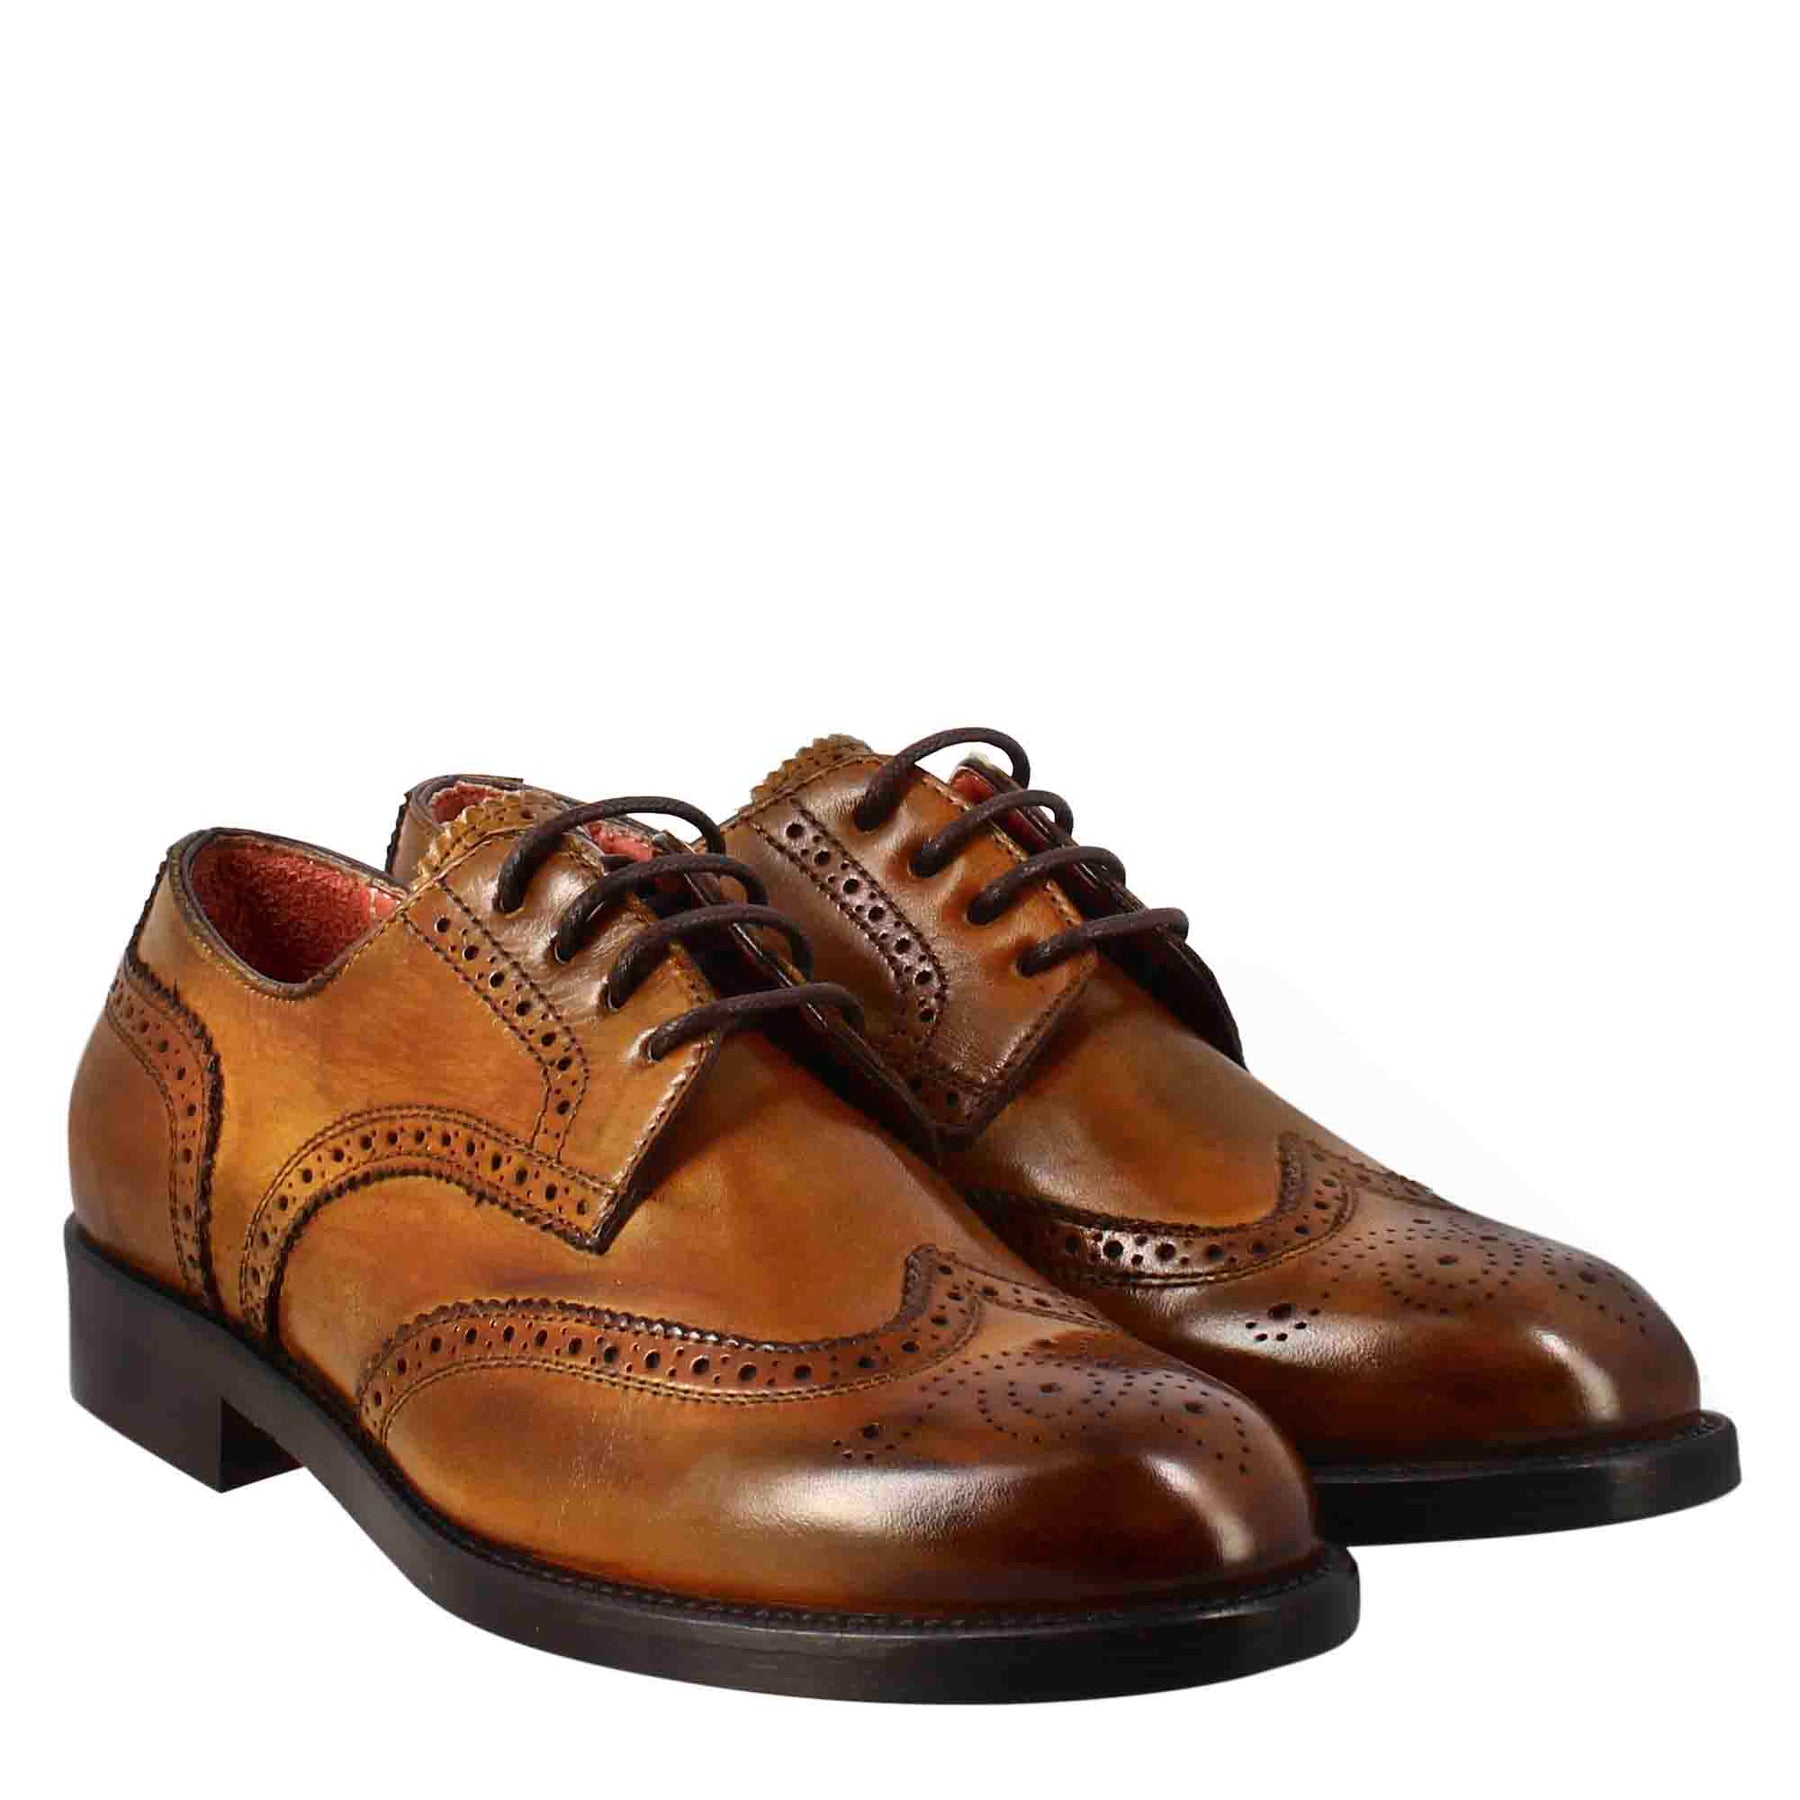 Women's derby with brogue effect in light brown leather